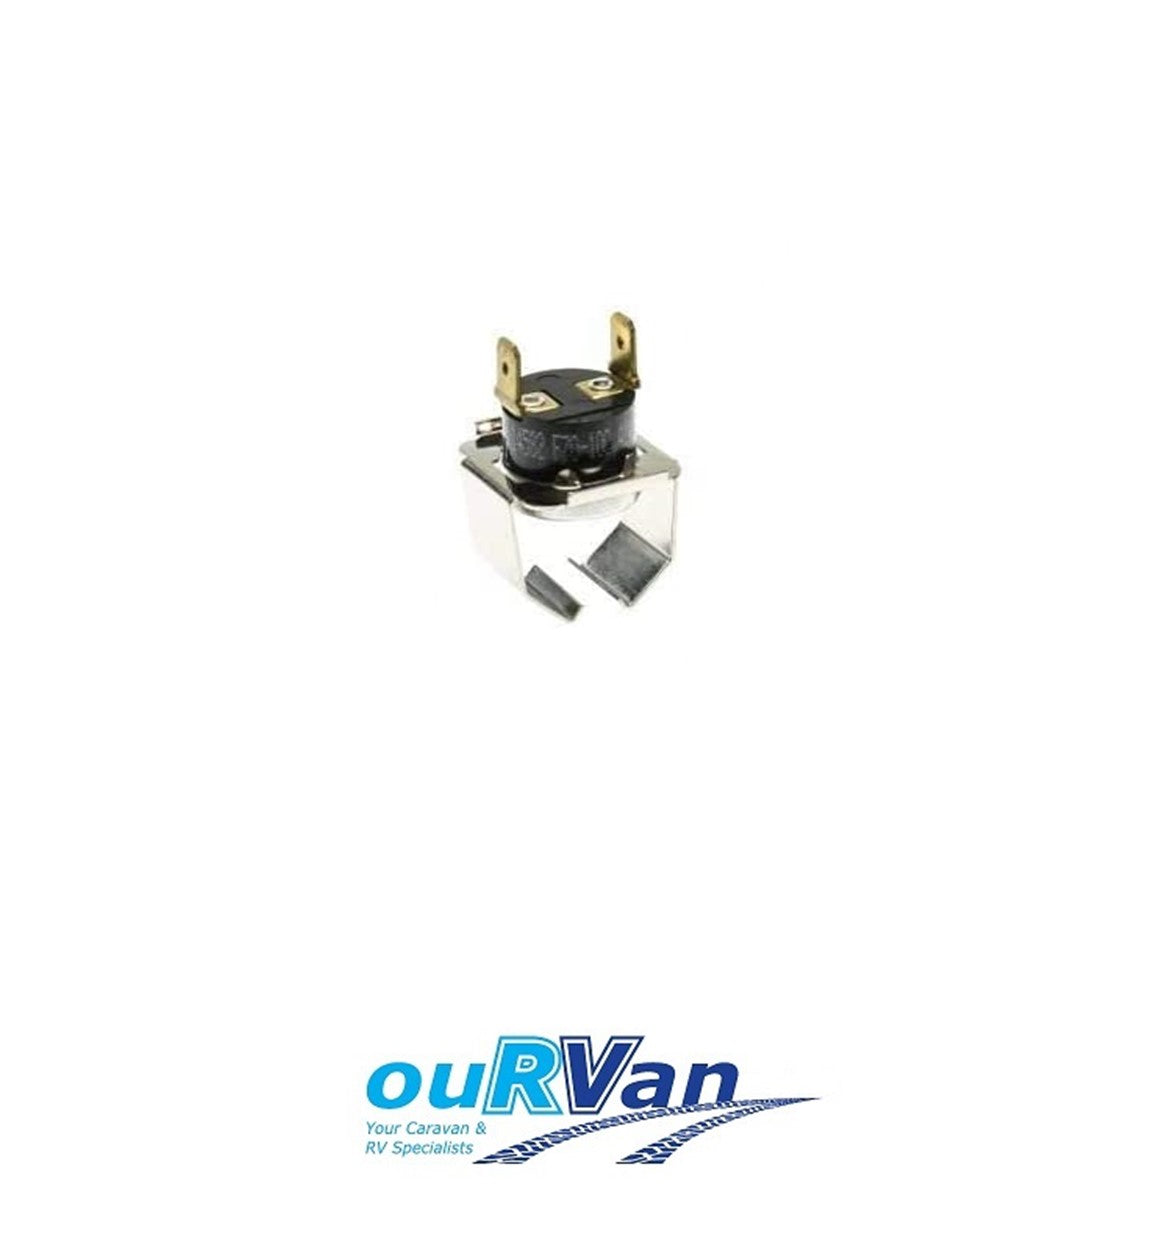 THERMOSTAT THERMODISC W/CLIP FOR FAN RML8551/RMDX